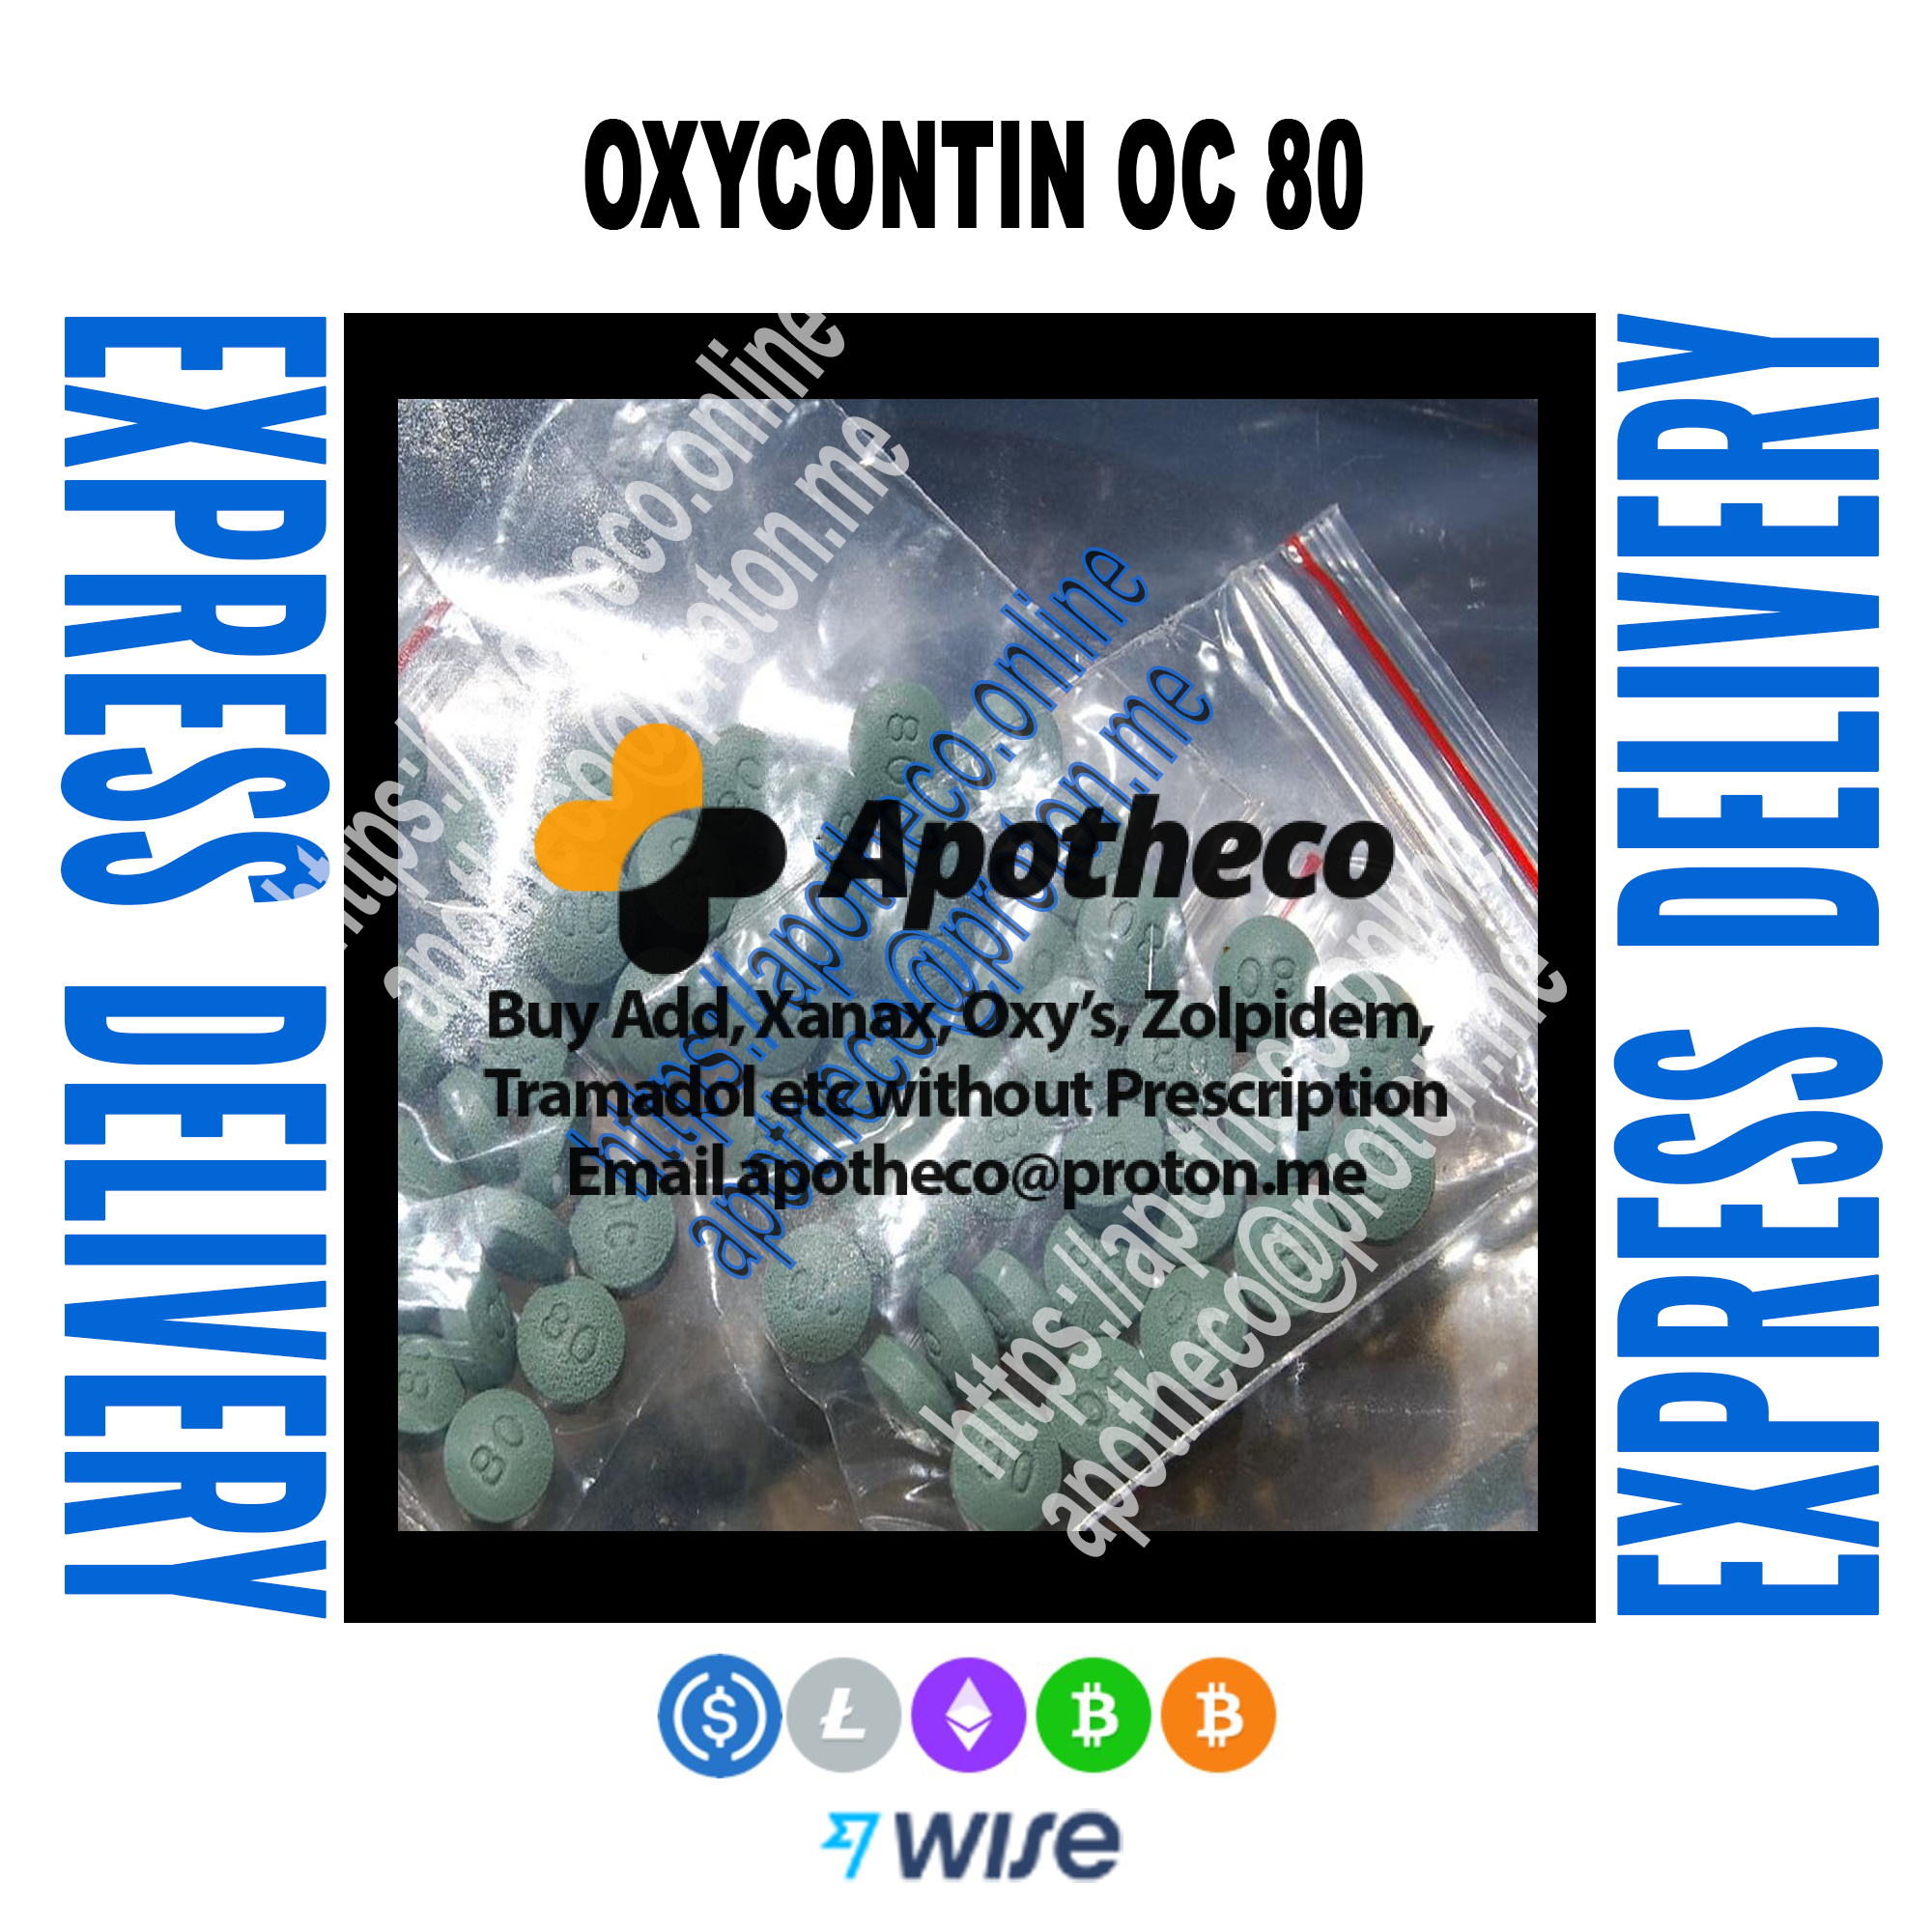 Buy Oxycontin Online without Prescription